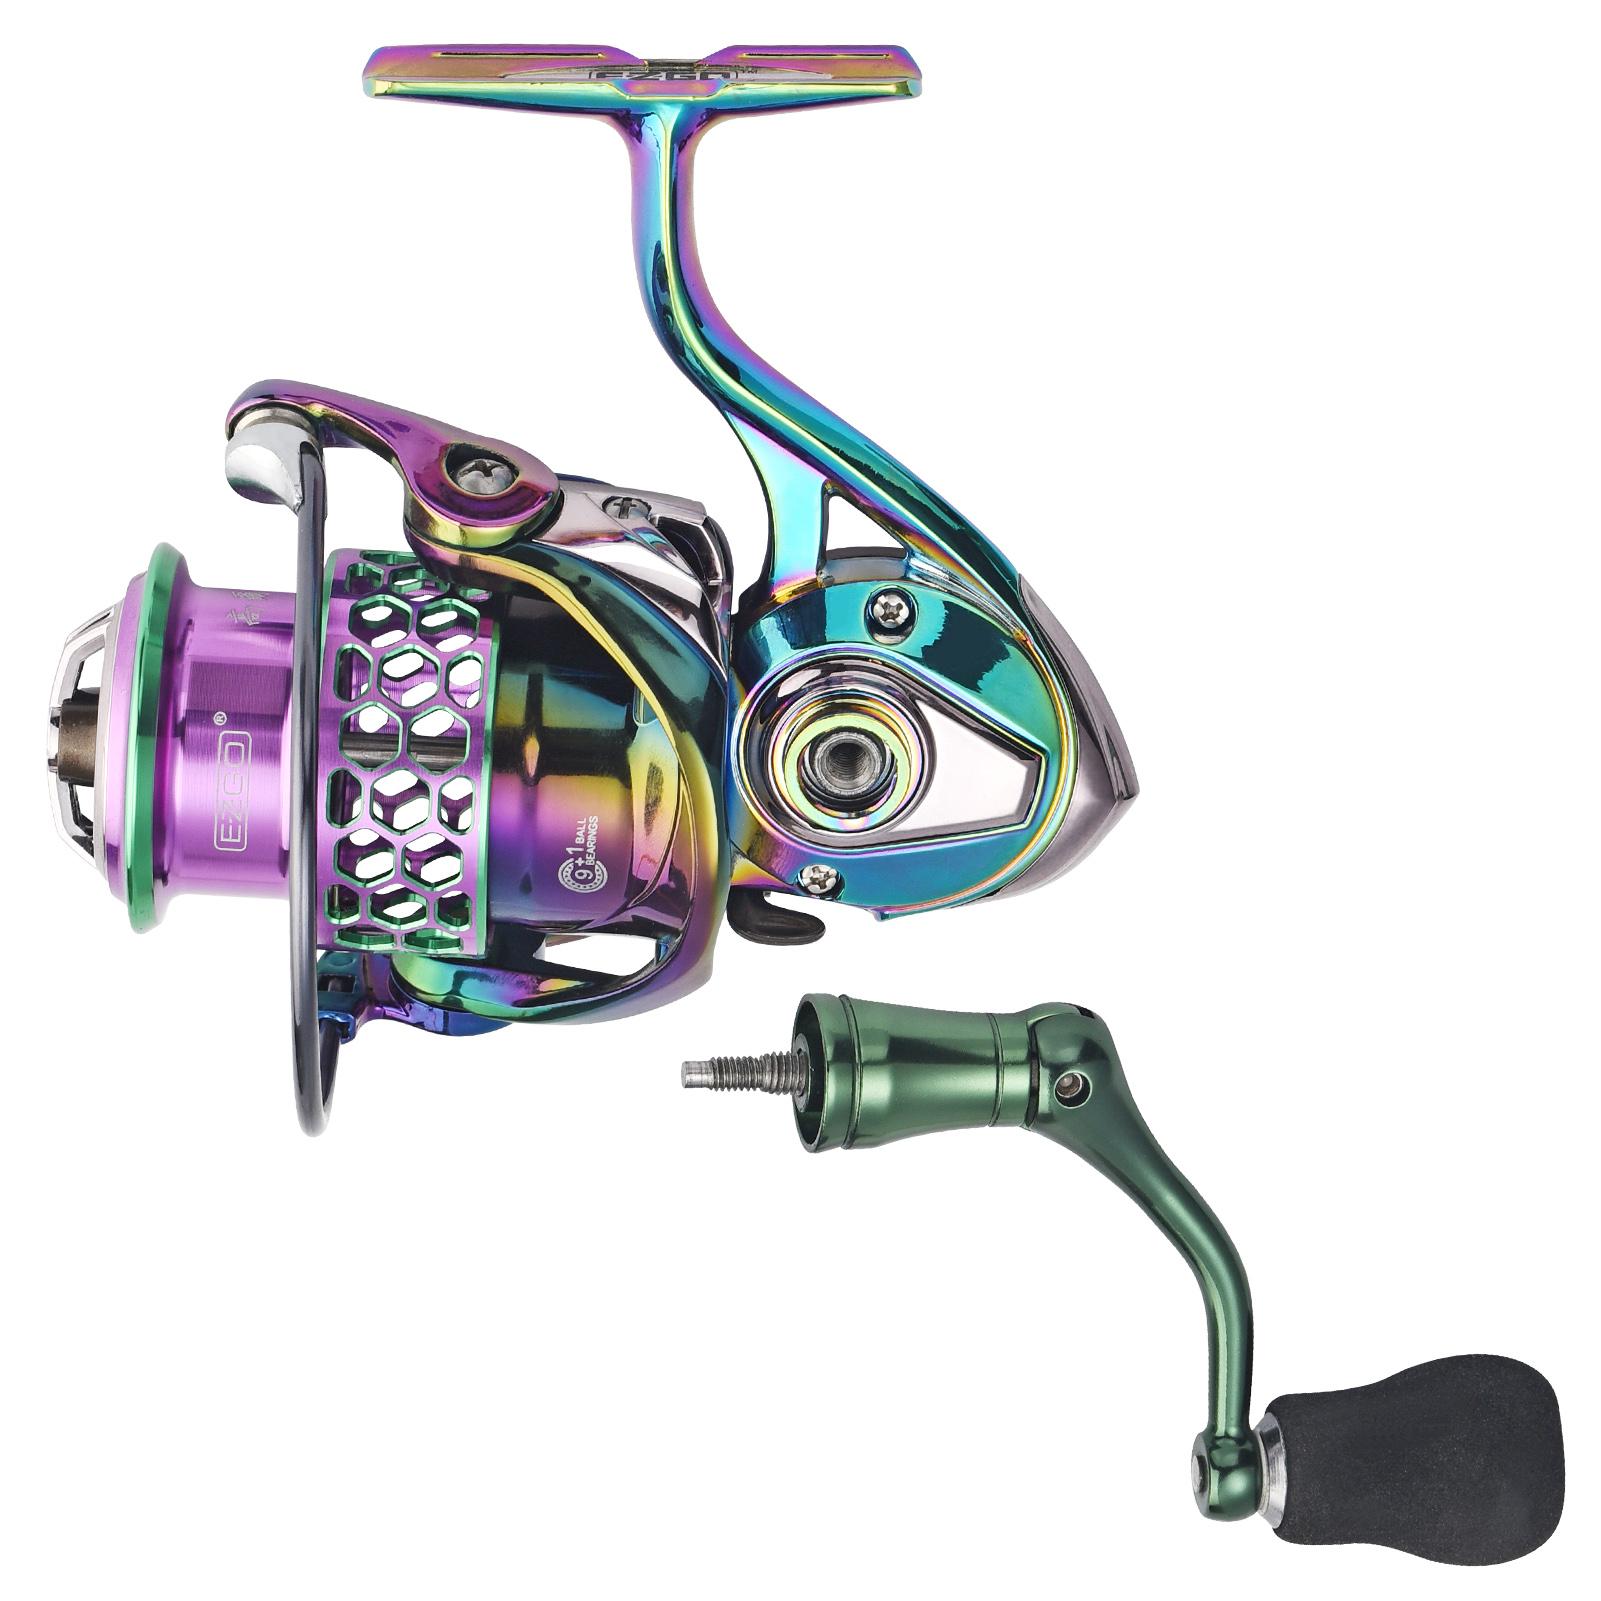 9+1BB Spinning Reel 5.2:1 with Interchangeable Left and Right Handle